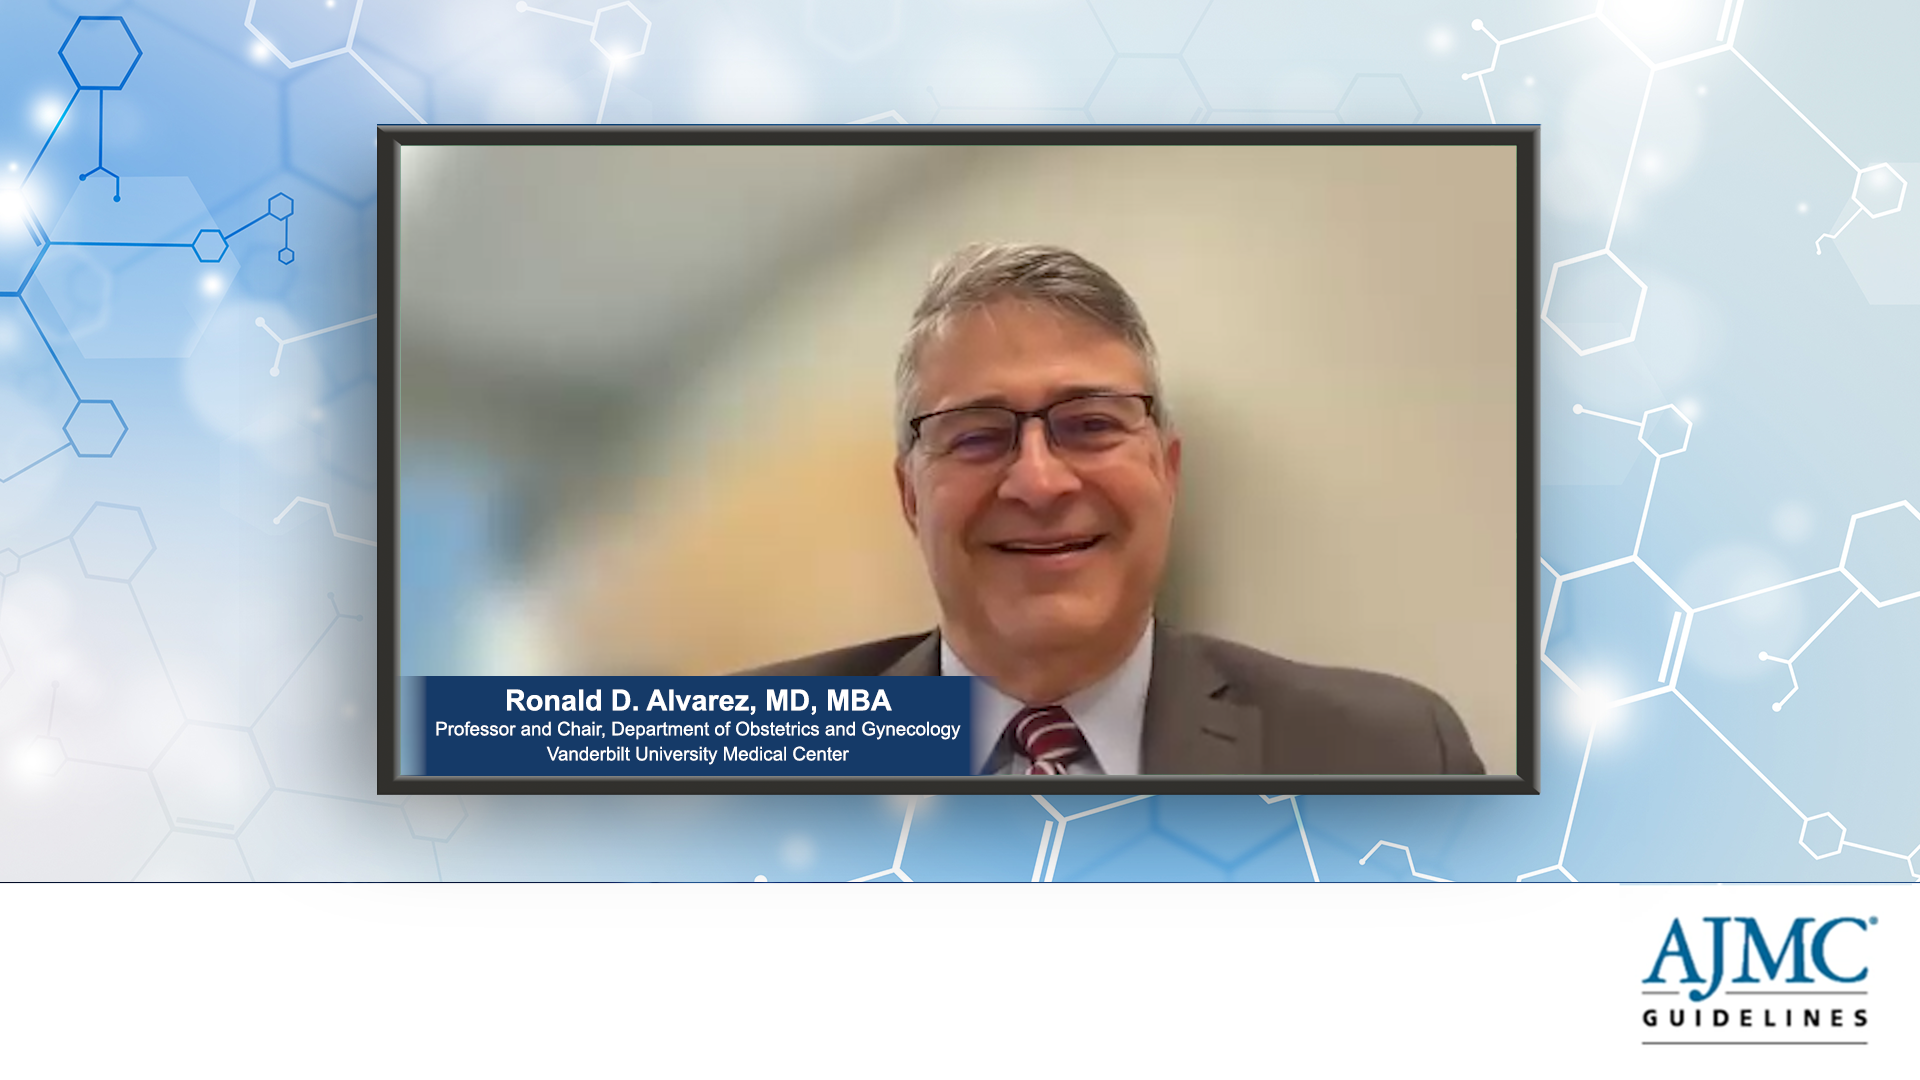 Video 6 - "Closing Thoughts on the Current Ovarian Cancer Treatment Landscape"